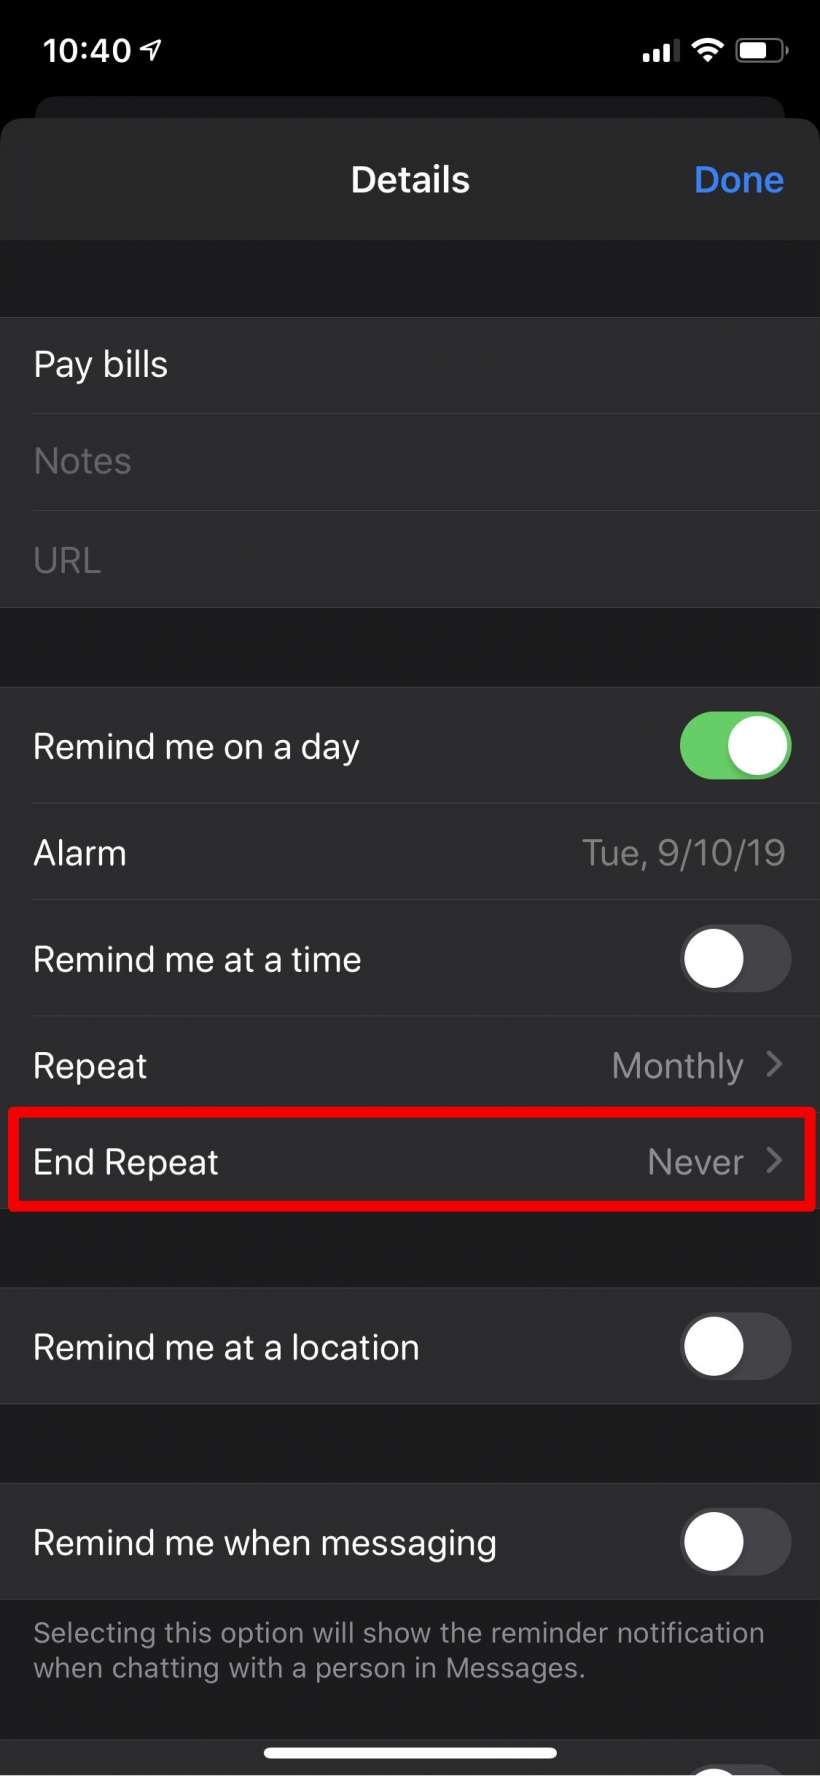 How to make reminders happen weekly, monthly, yearly on iPhone and iPad.